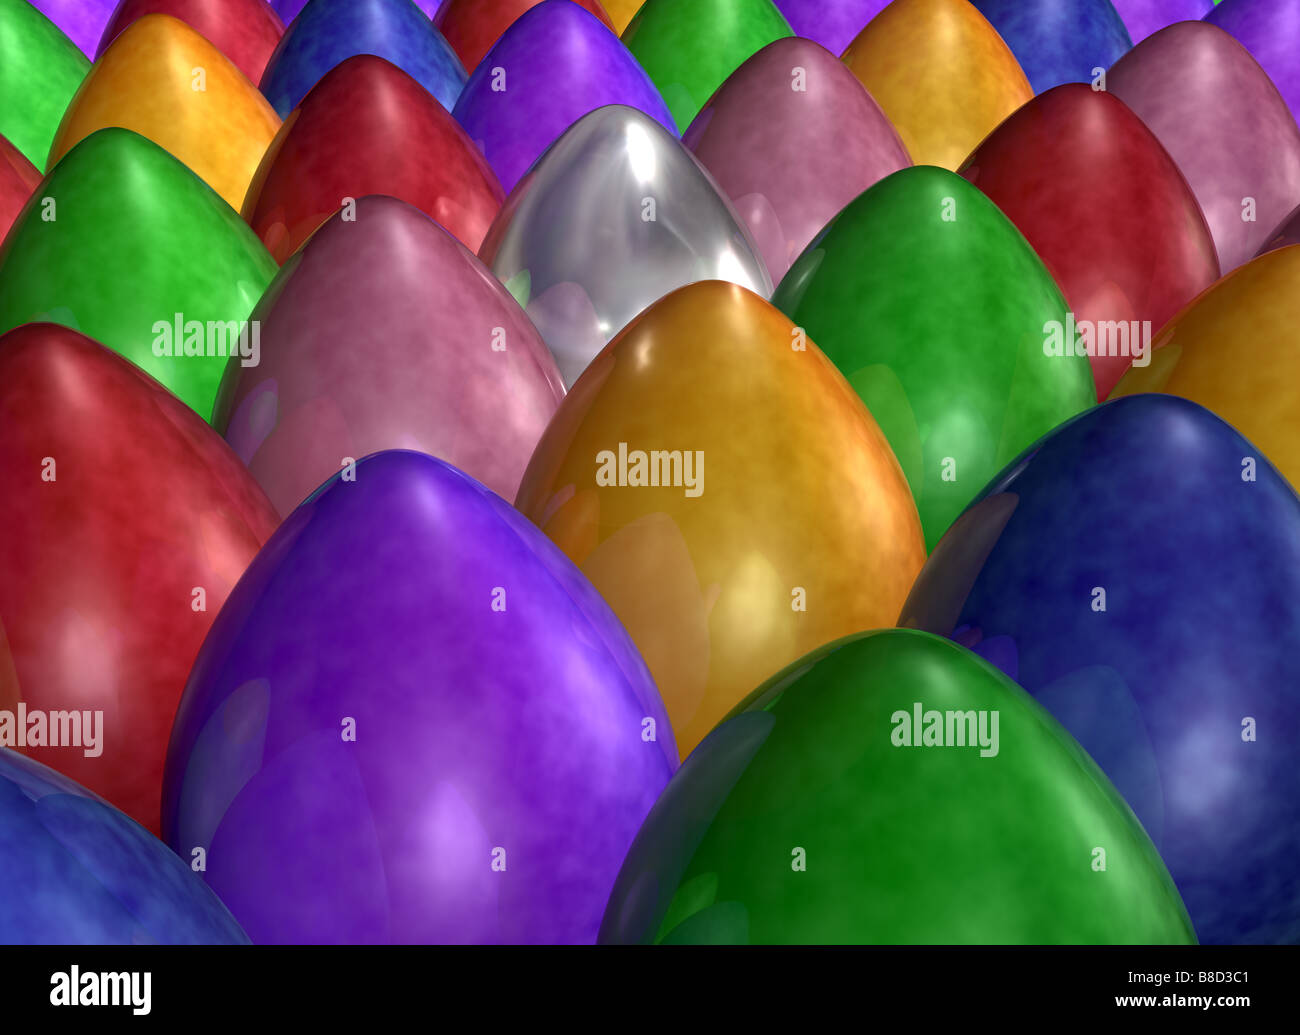 Illustration of an army of brightly colored eggs Stock Photo